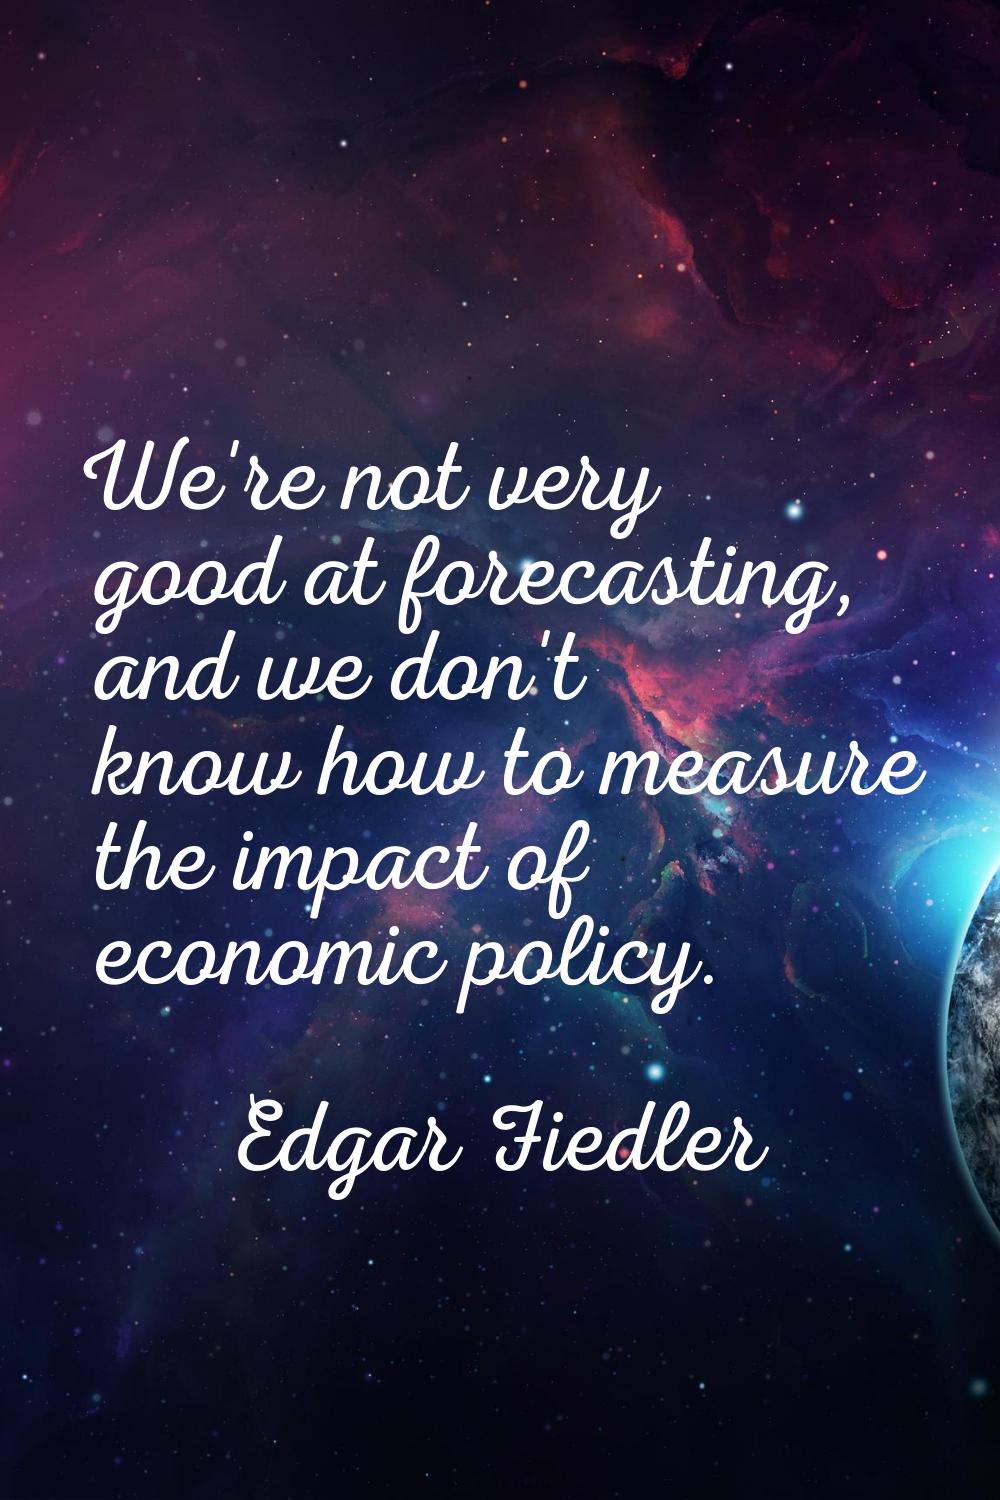 We're not very good at forecasting, and we don't know how to measure the impact of economic policy.